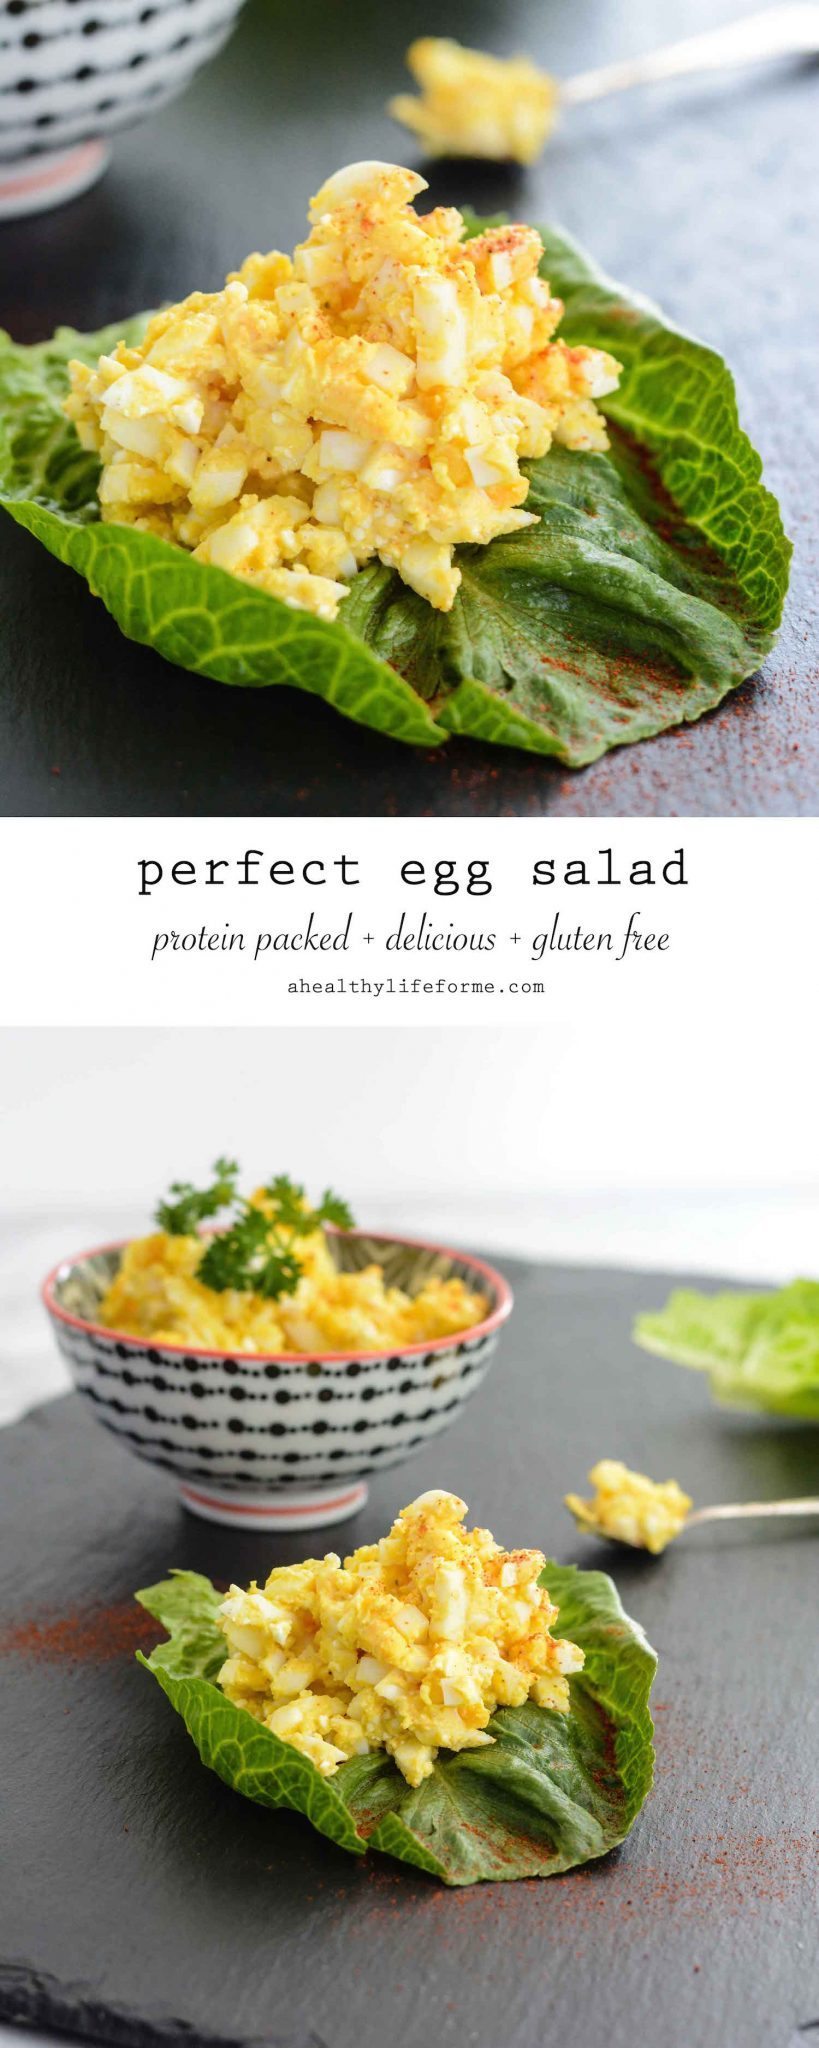 Perfect Egg Salad Recipe that is quick and easy to prepare and packed with protein | ahealthylifeforme.com